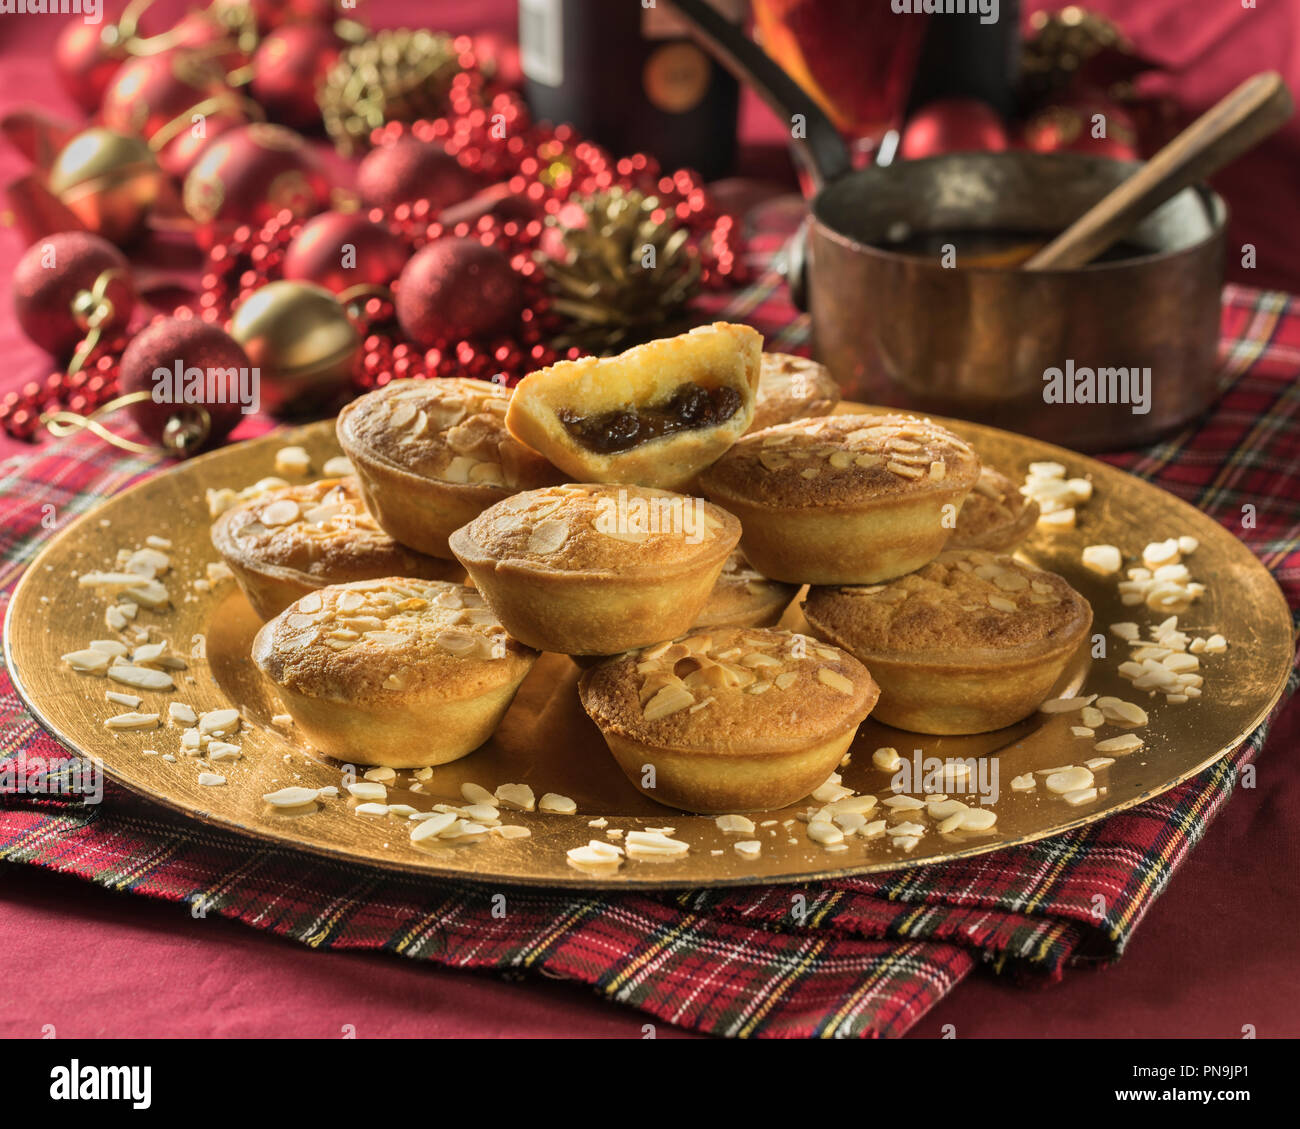 Frangipane mince pies with almond topping.  Festive food UK Stock Photo